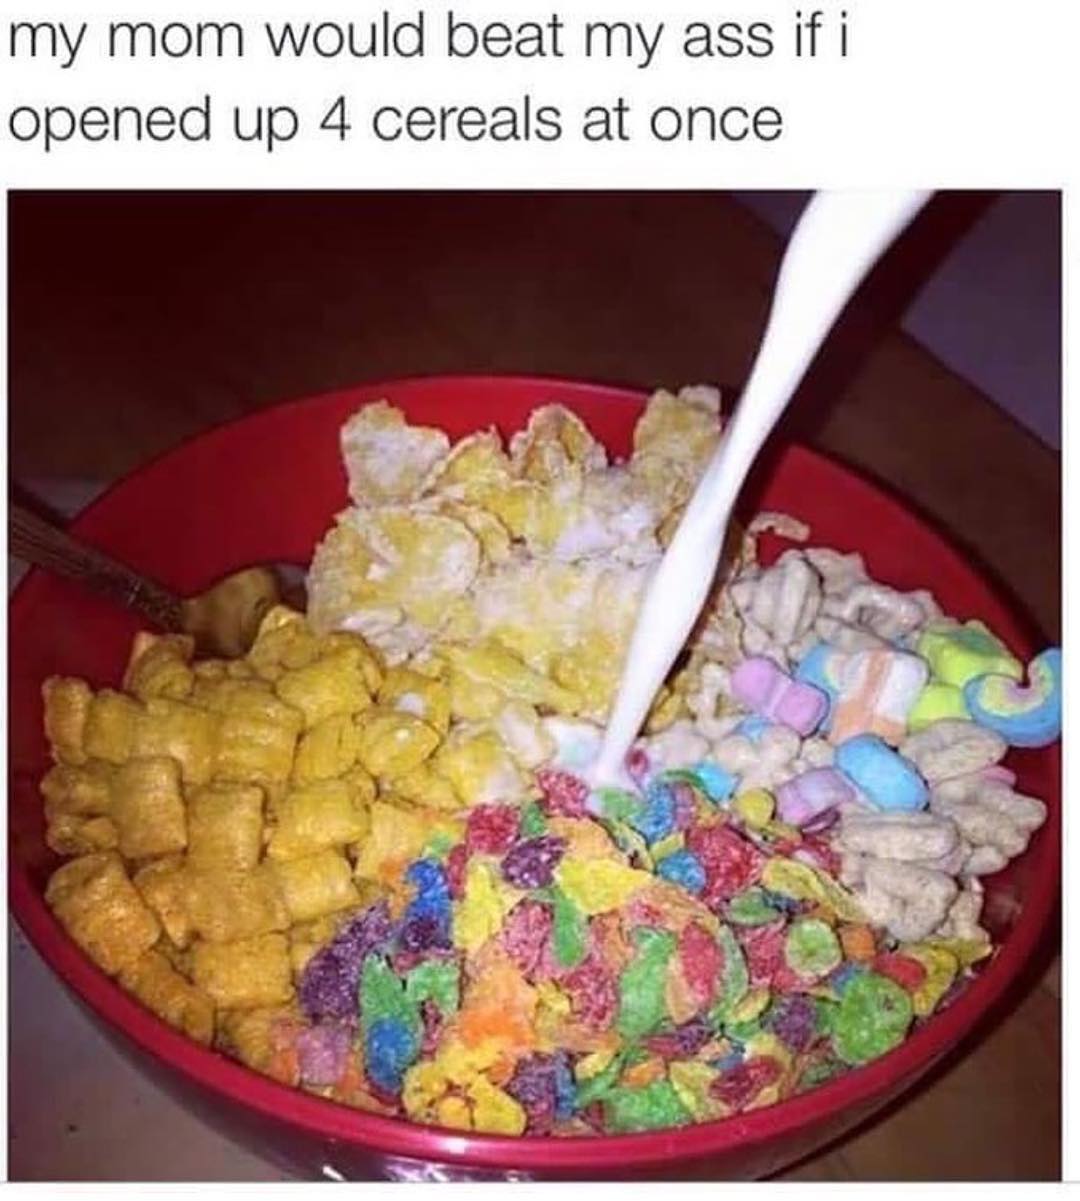 My mom would beat my ass if I opened 4 cereals at once.